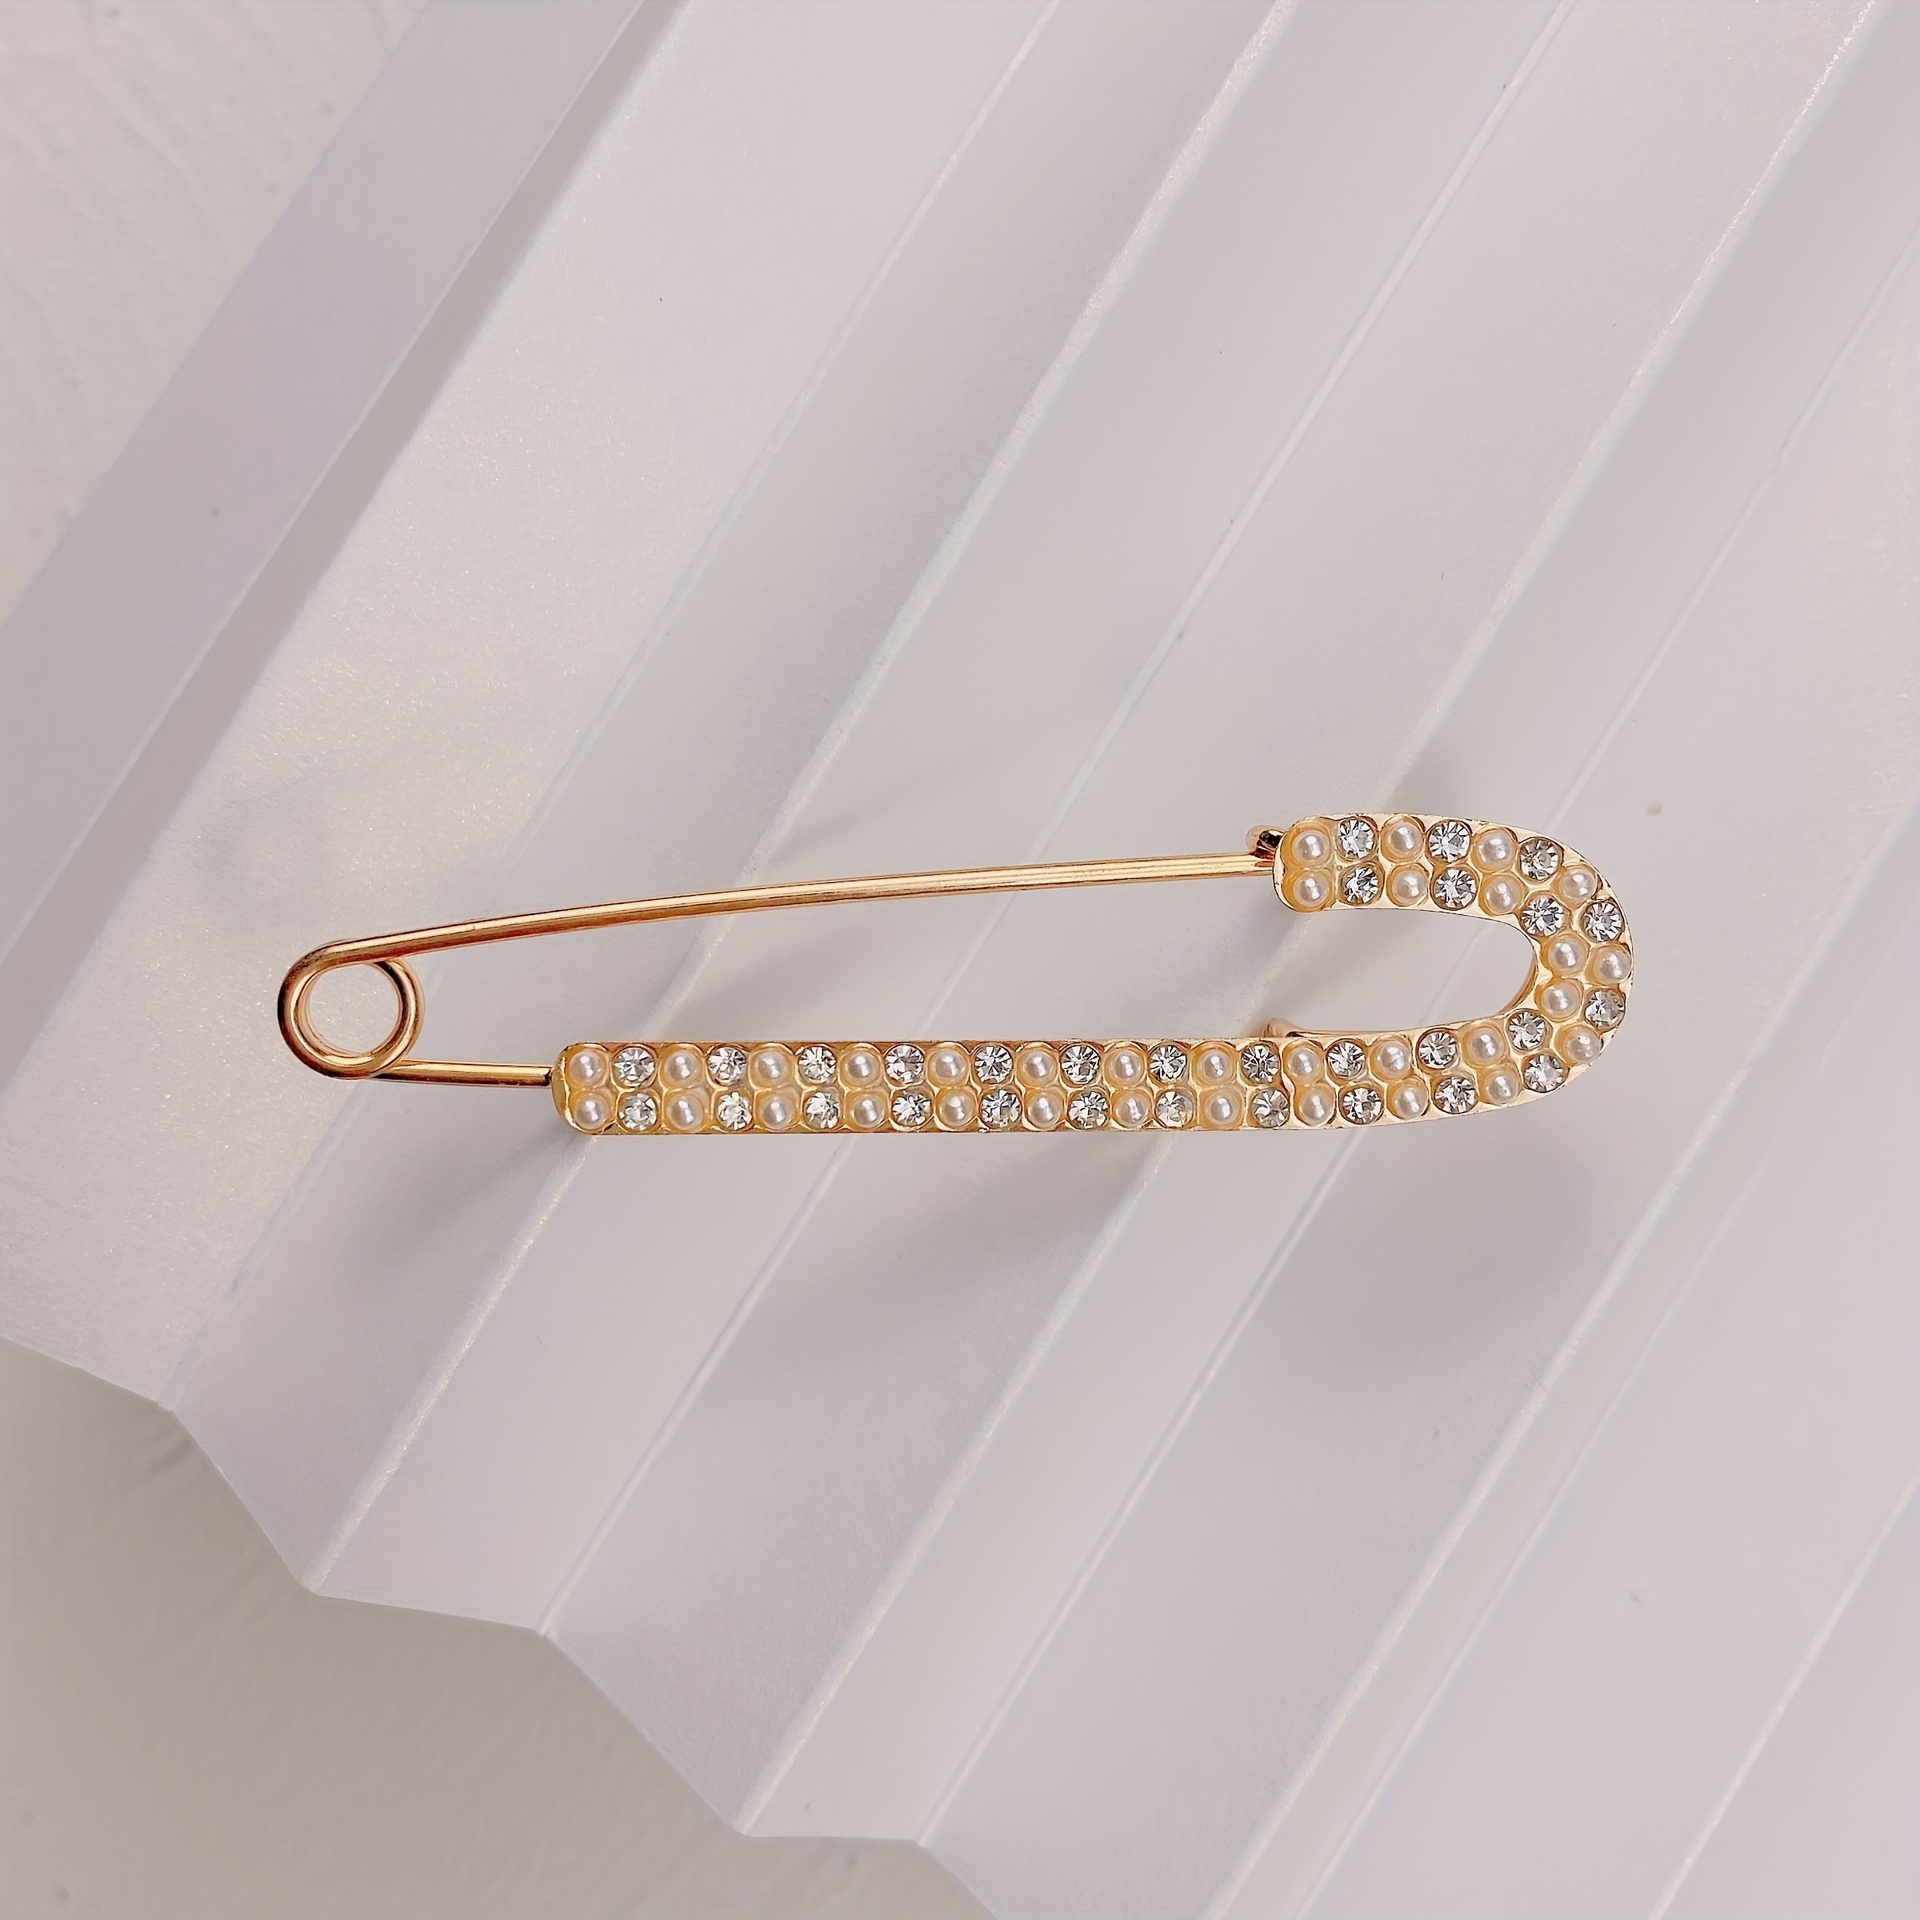 Safety Pin Brooch: Women's Accessories, Hair Pins